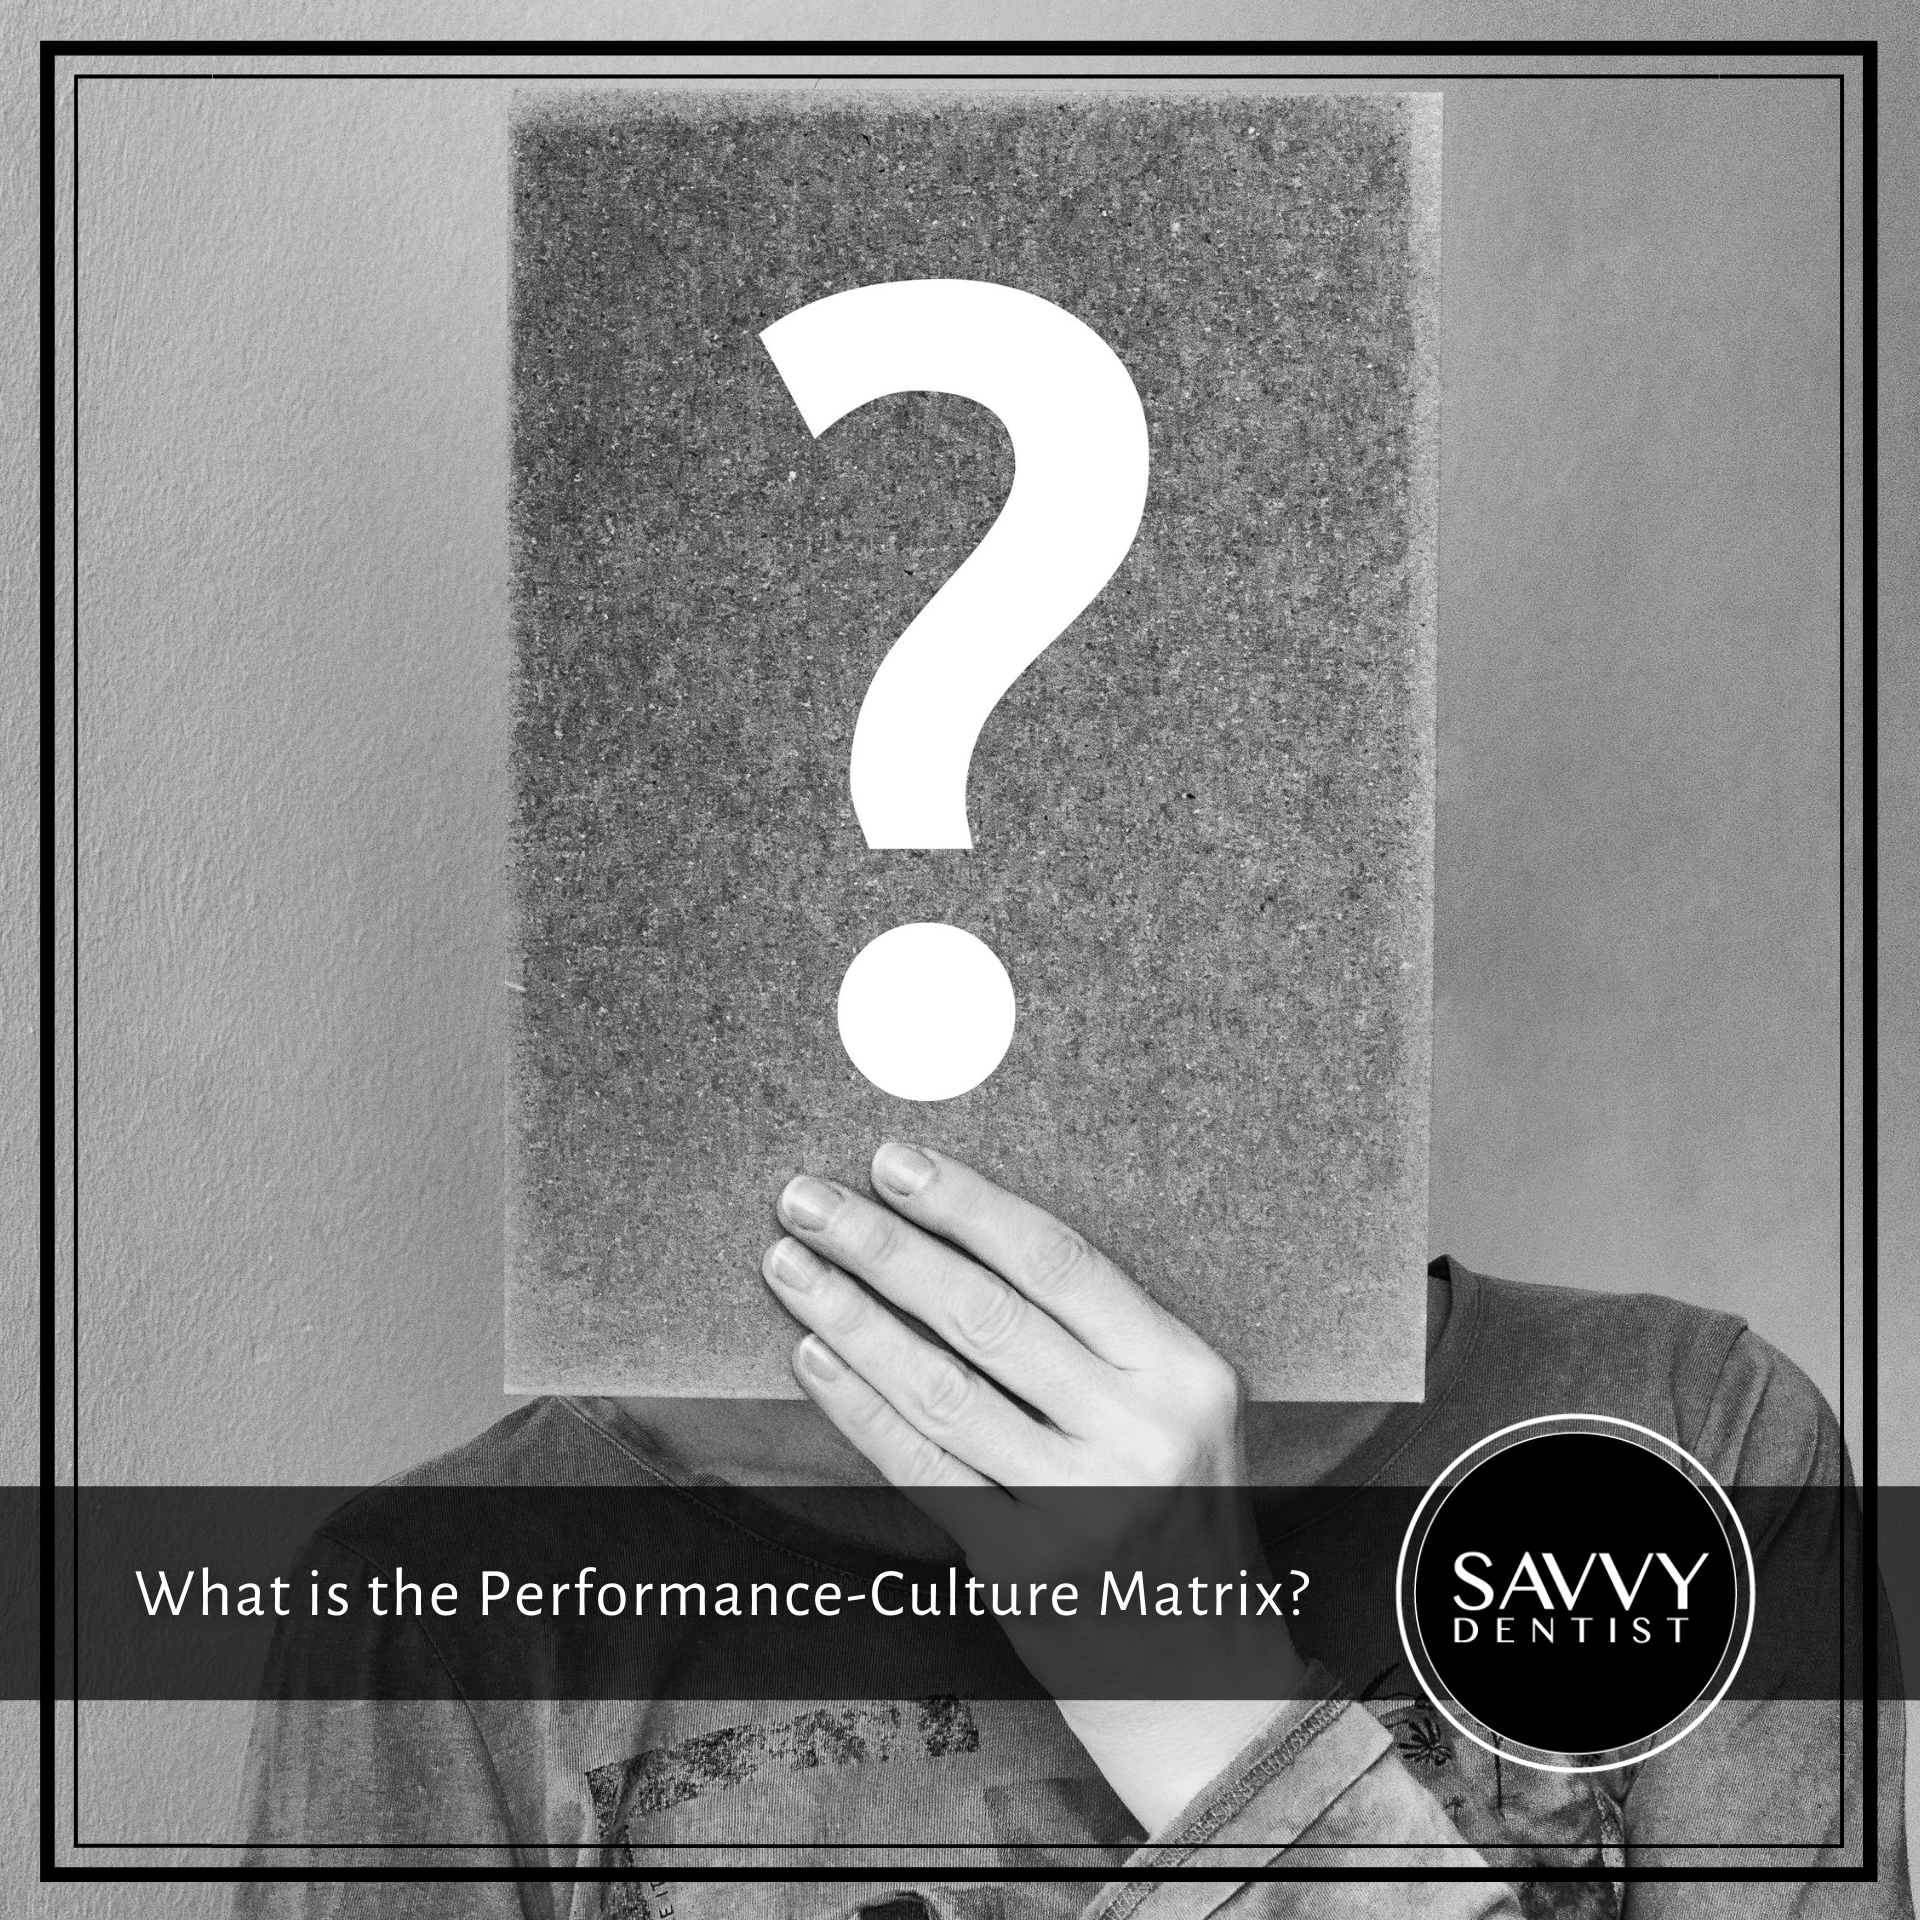 What is the Performance-Culture Matrix?